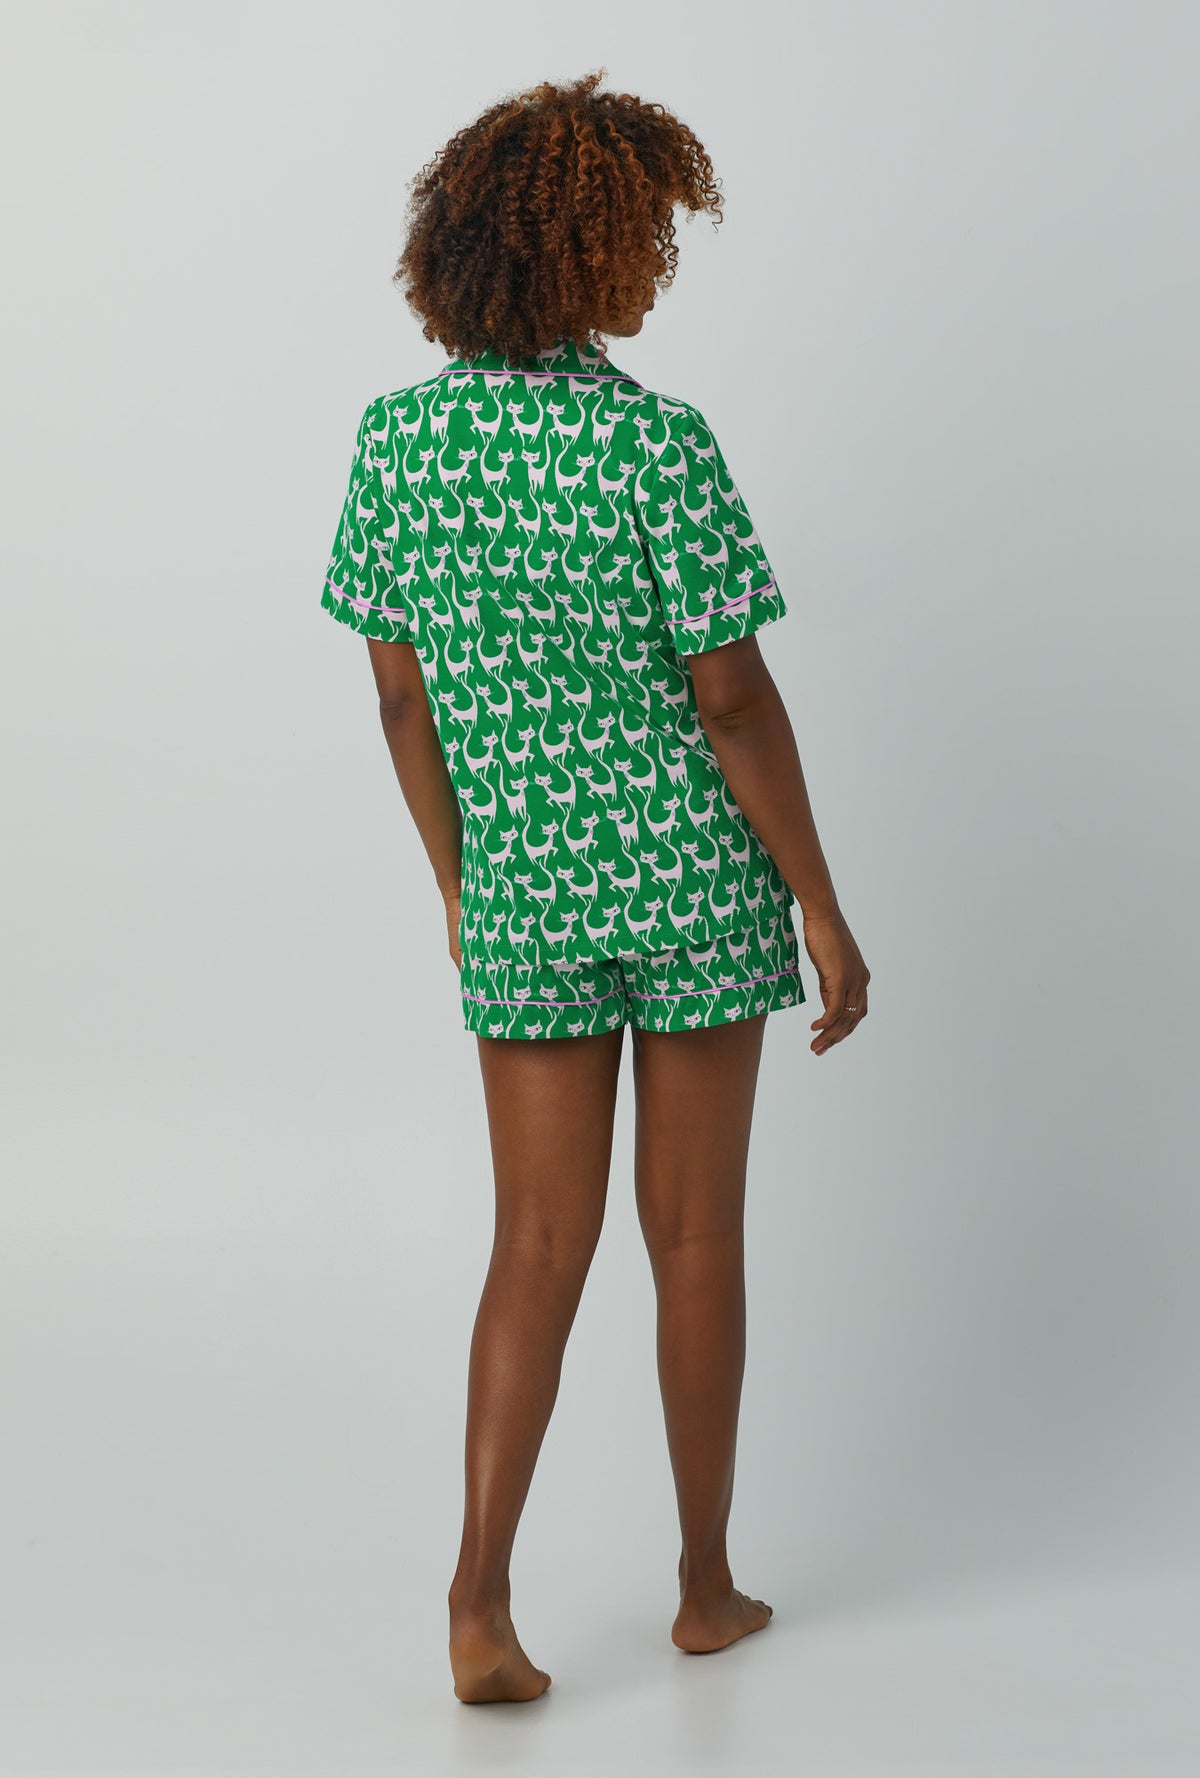 A lady wearing green Short Sleeve Classic Shorty Stretch Jersey PJ Set with Cool Cats print